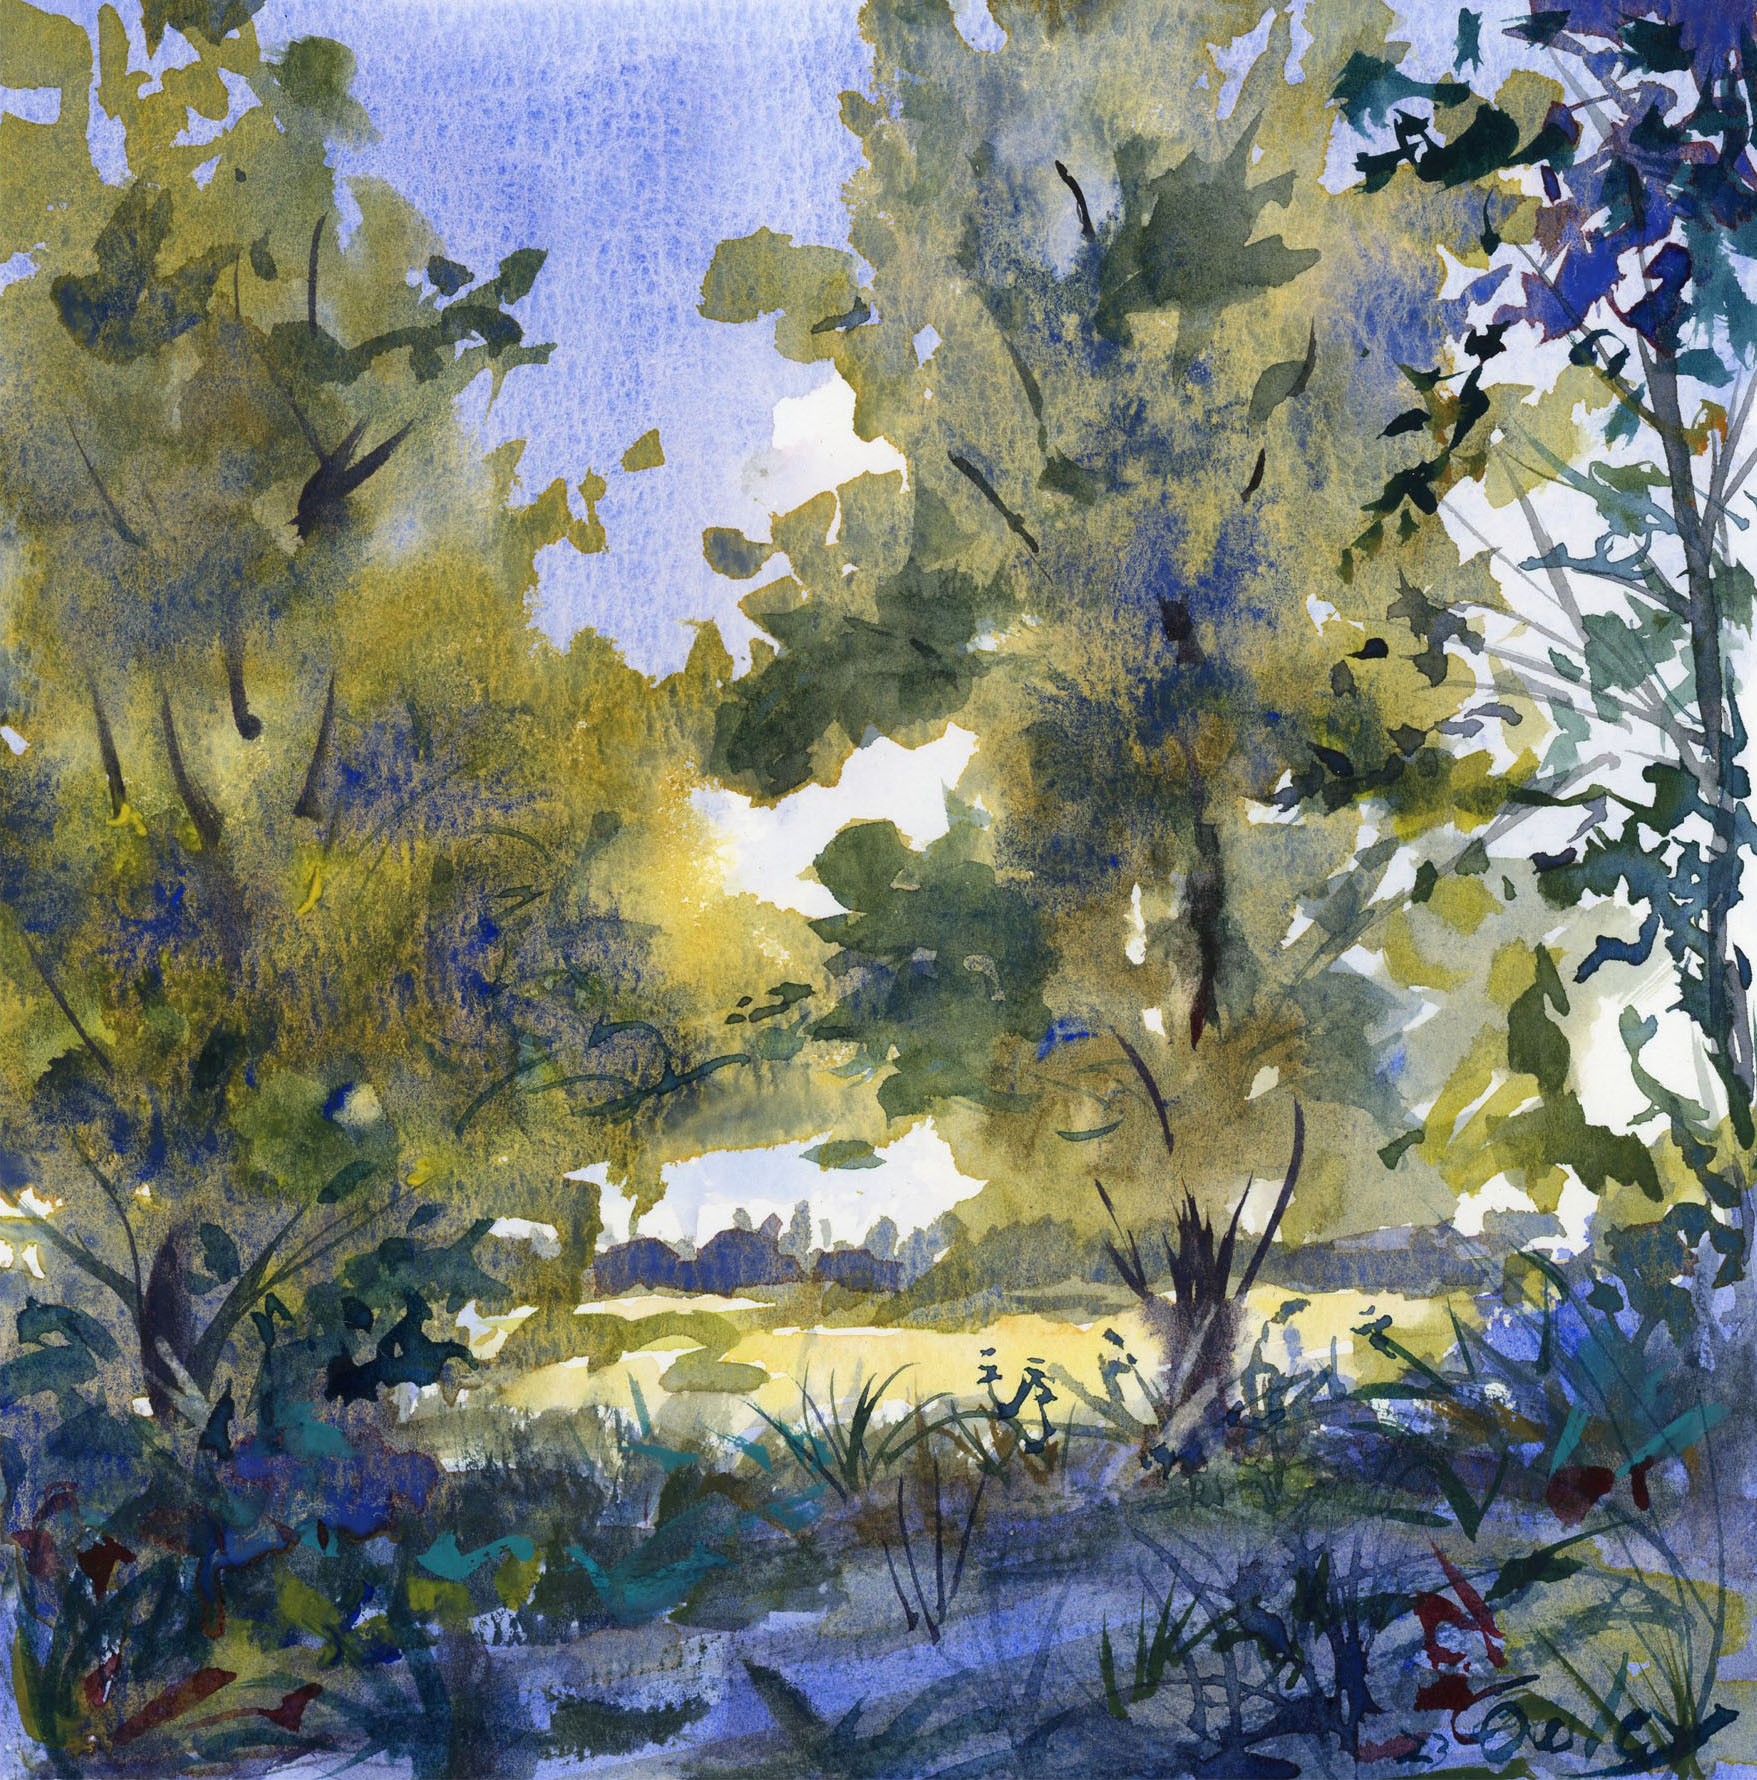 Watercolor and Gouache – Chris Ousley's Studio